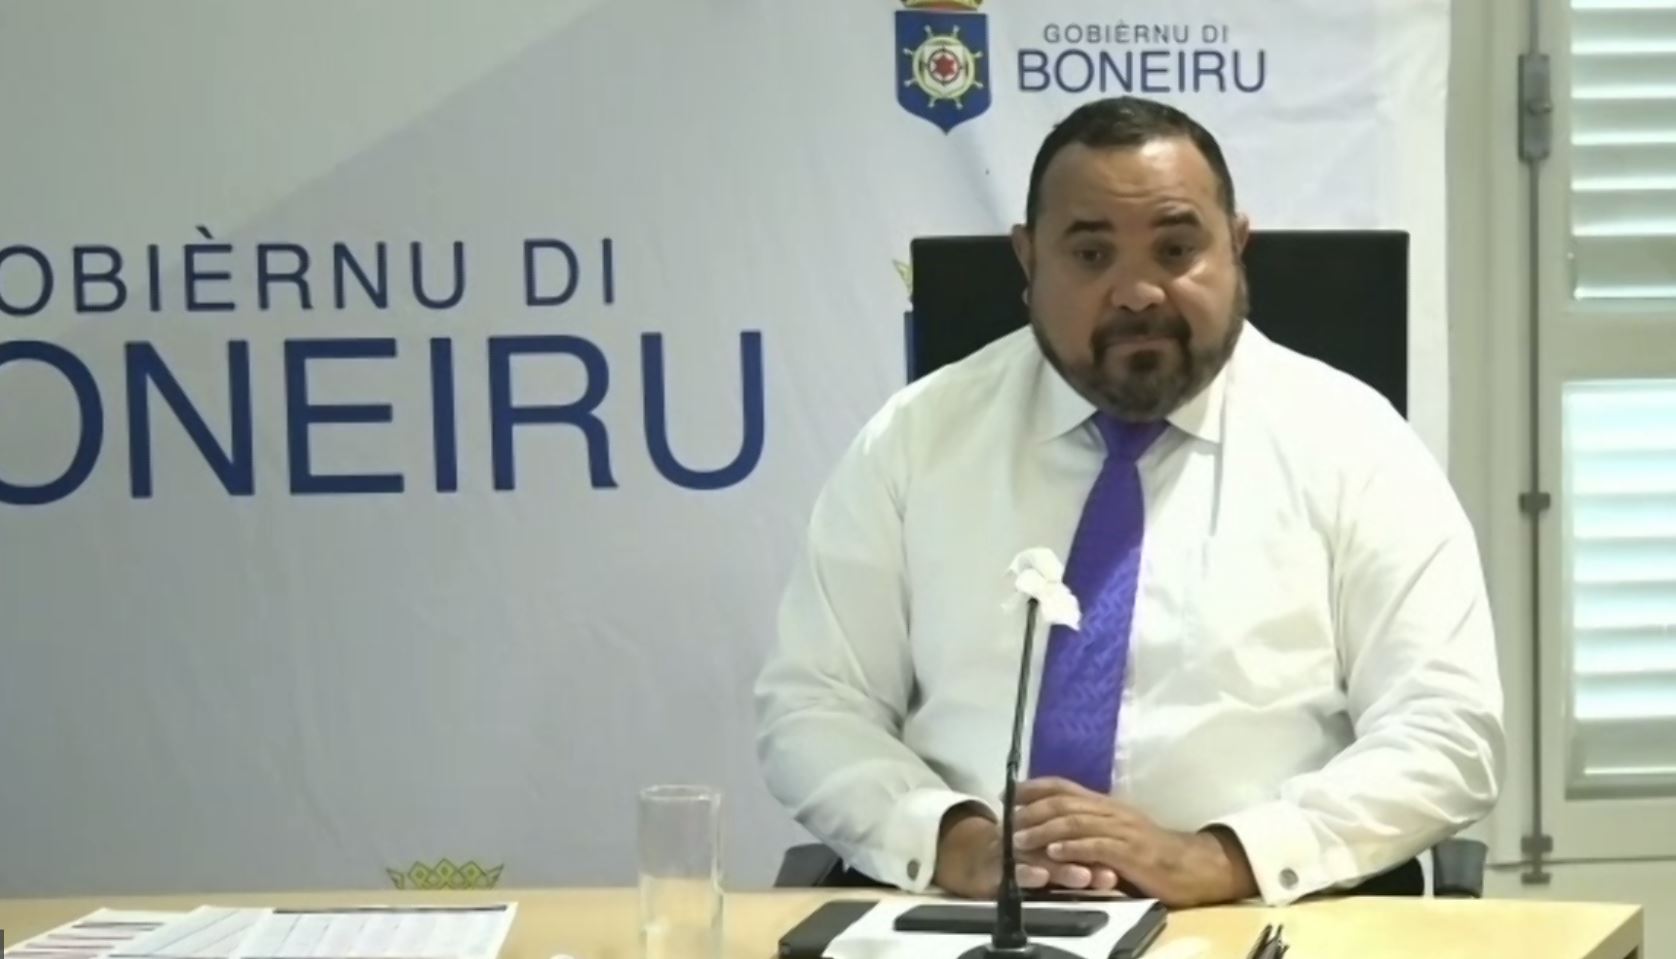 Governor Rijna call Covid-19 situation on Bonaire 'serious'